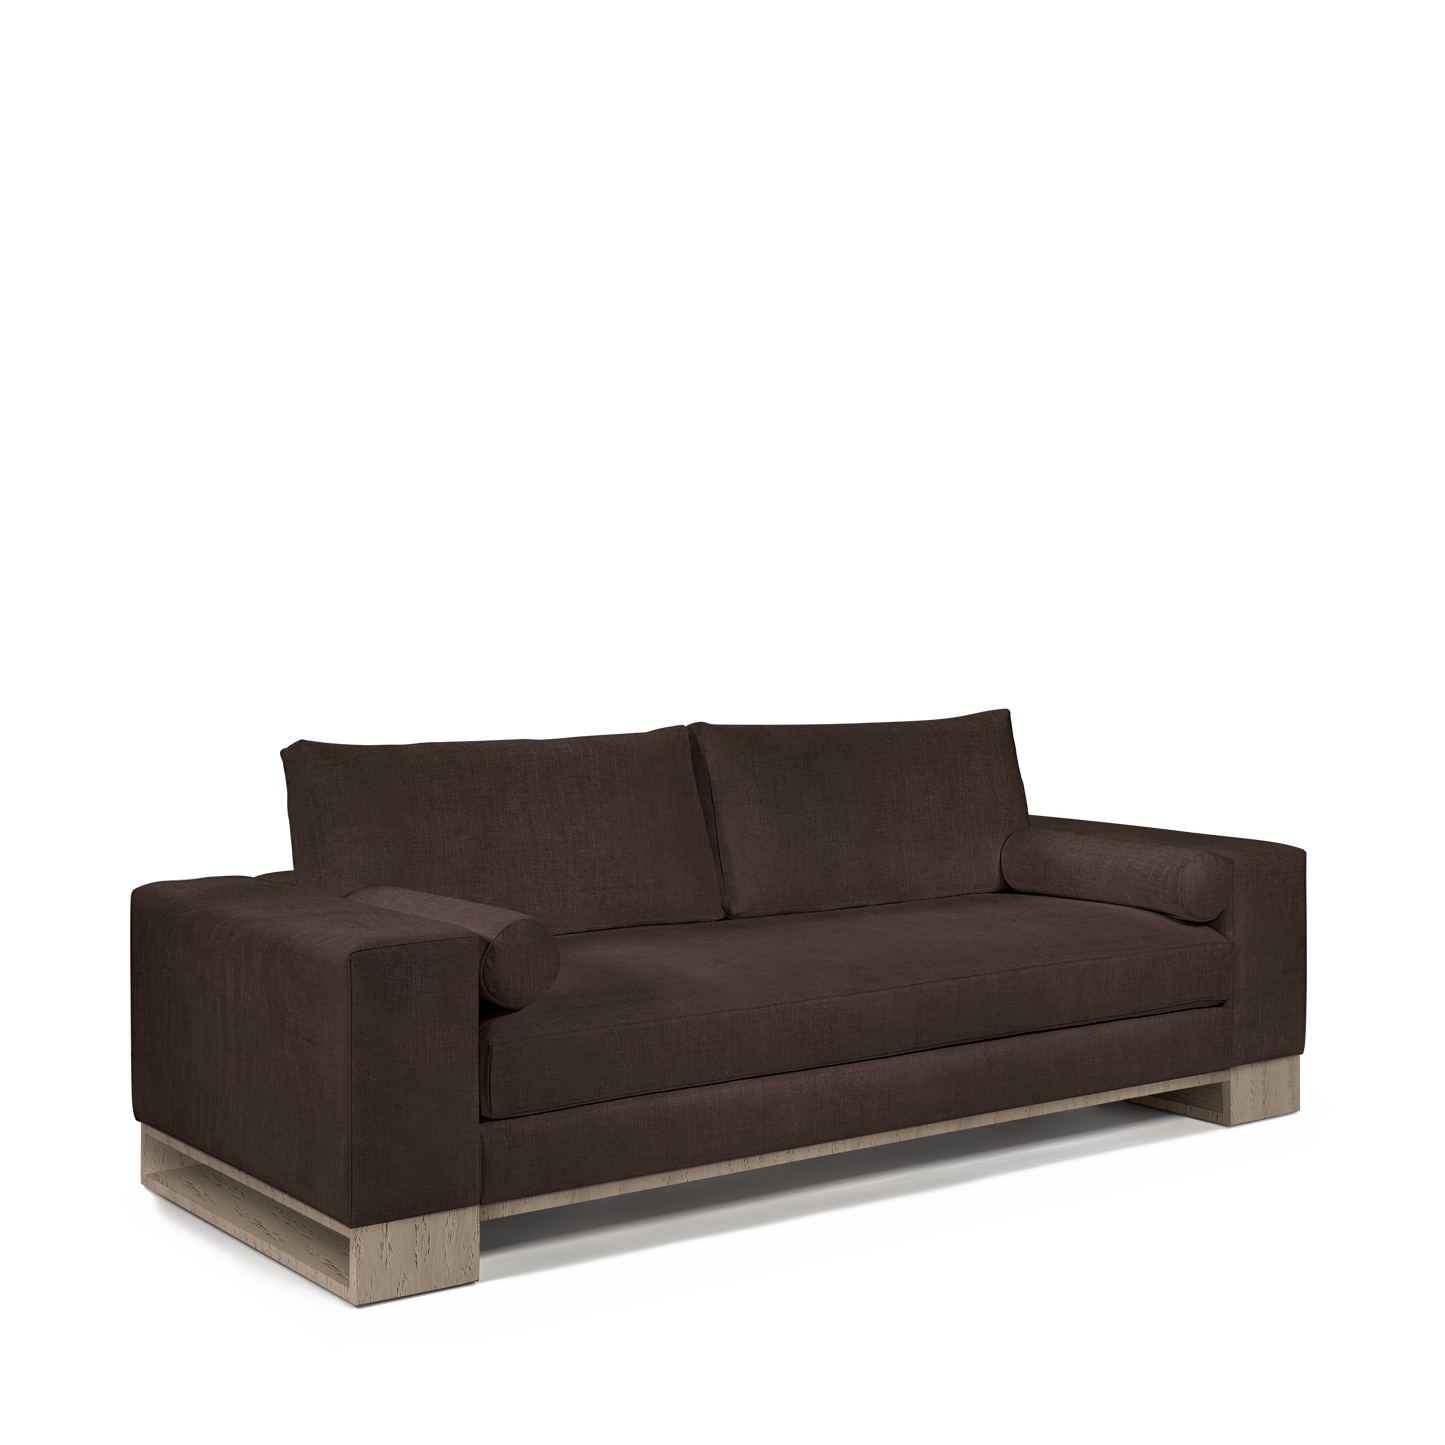 TERRA 2,5-seater sofa with linara brown textile and natural grey wood legs 